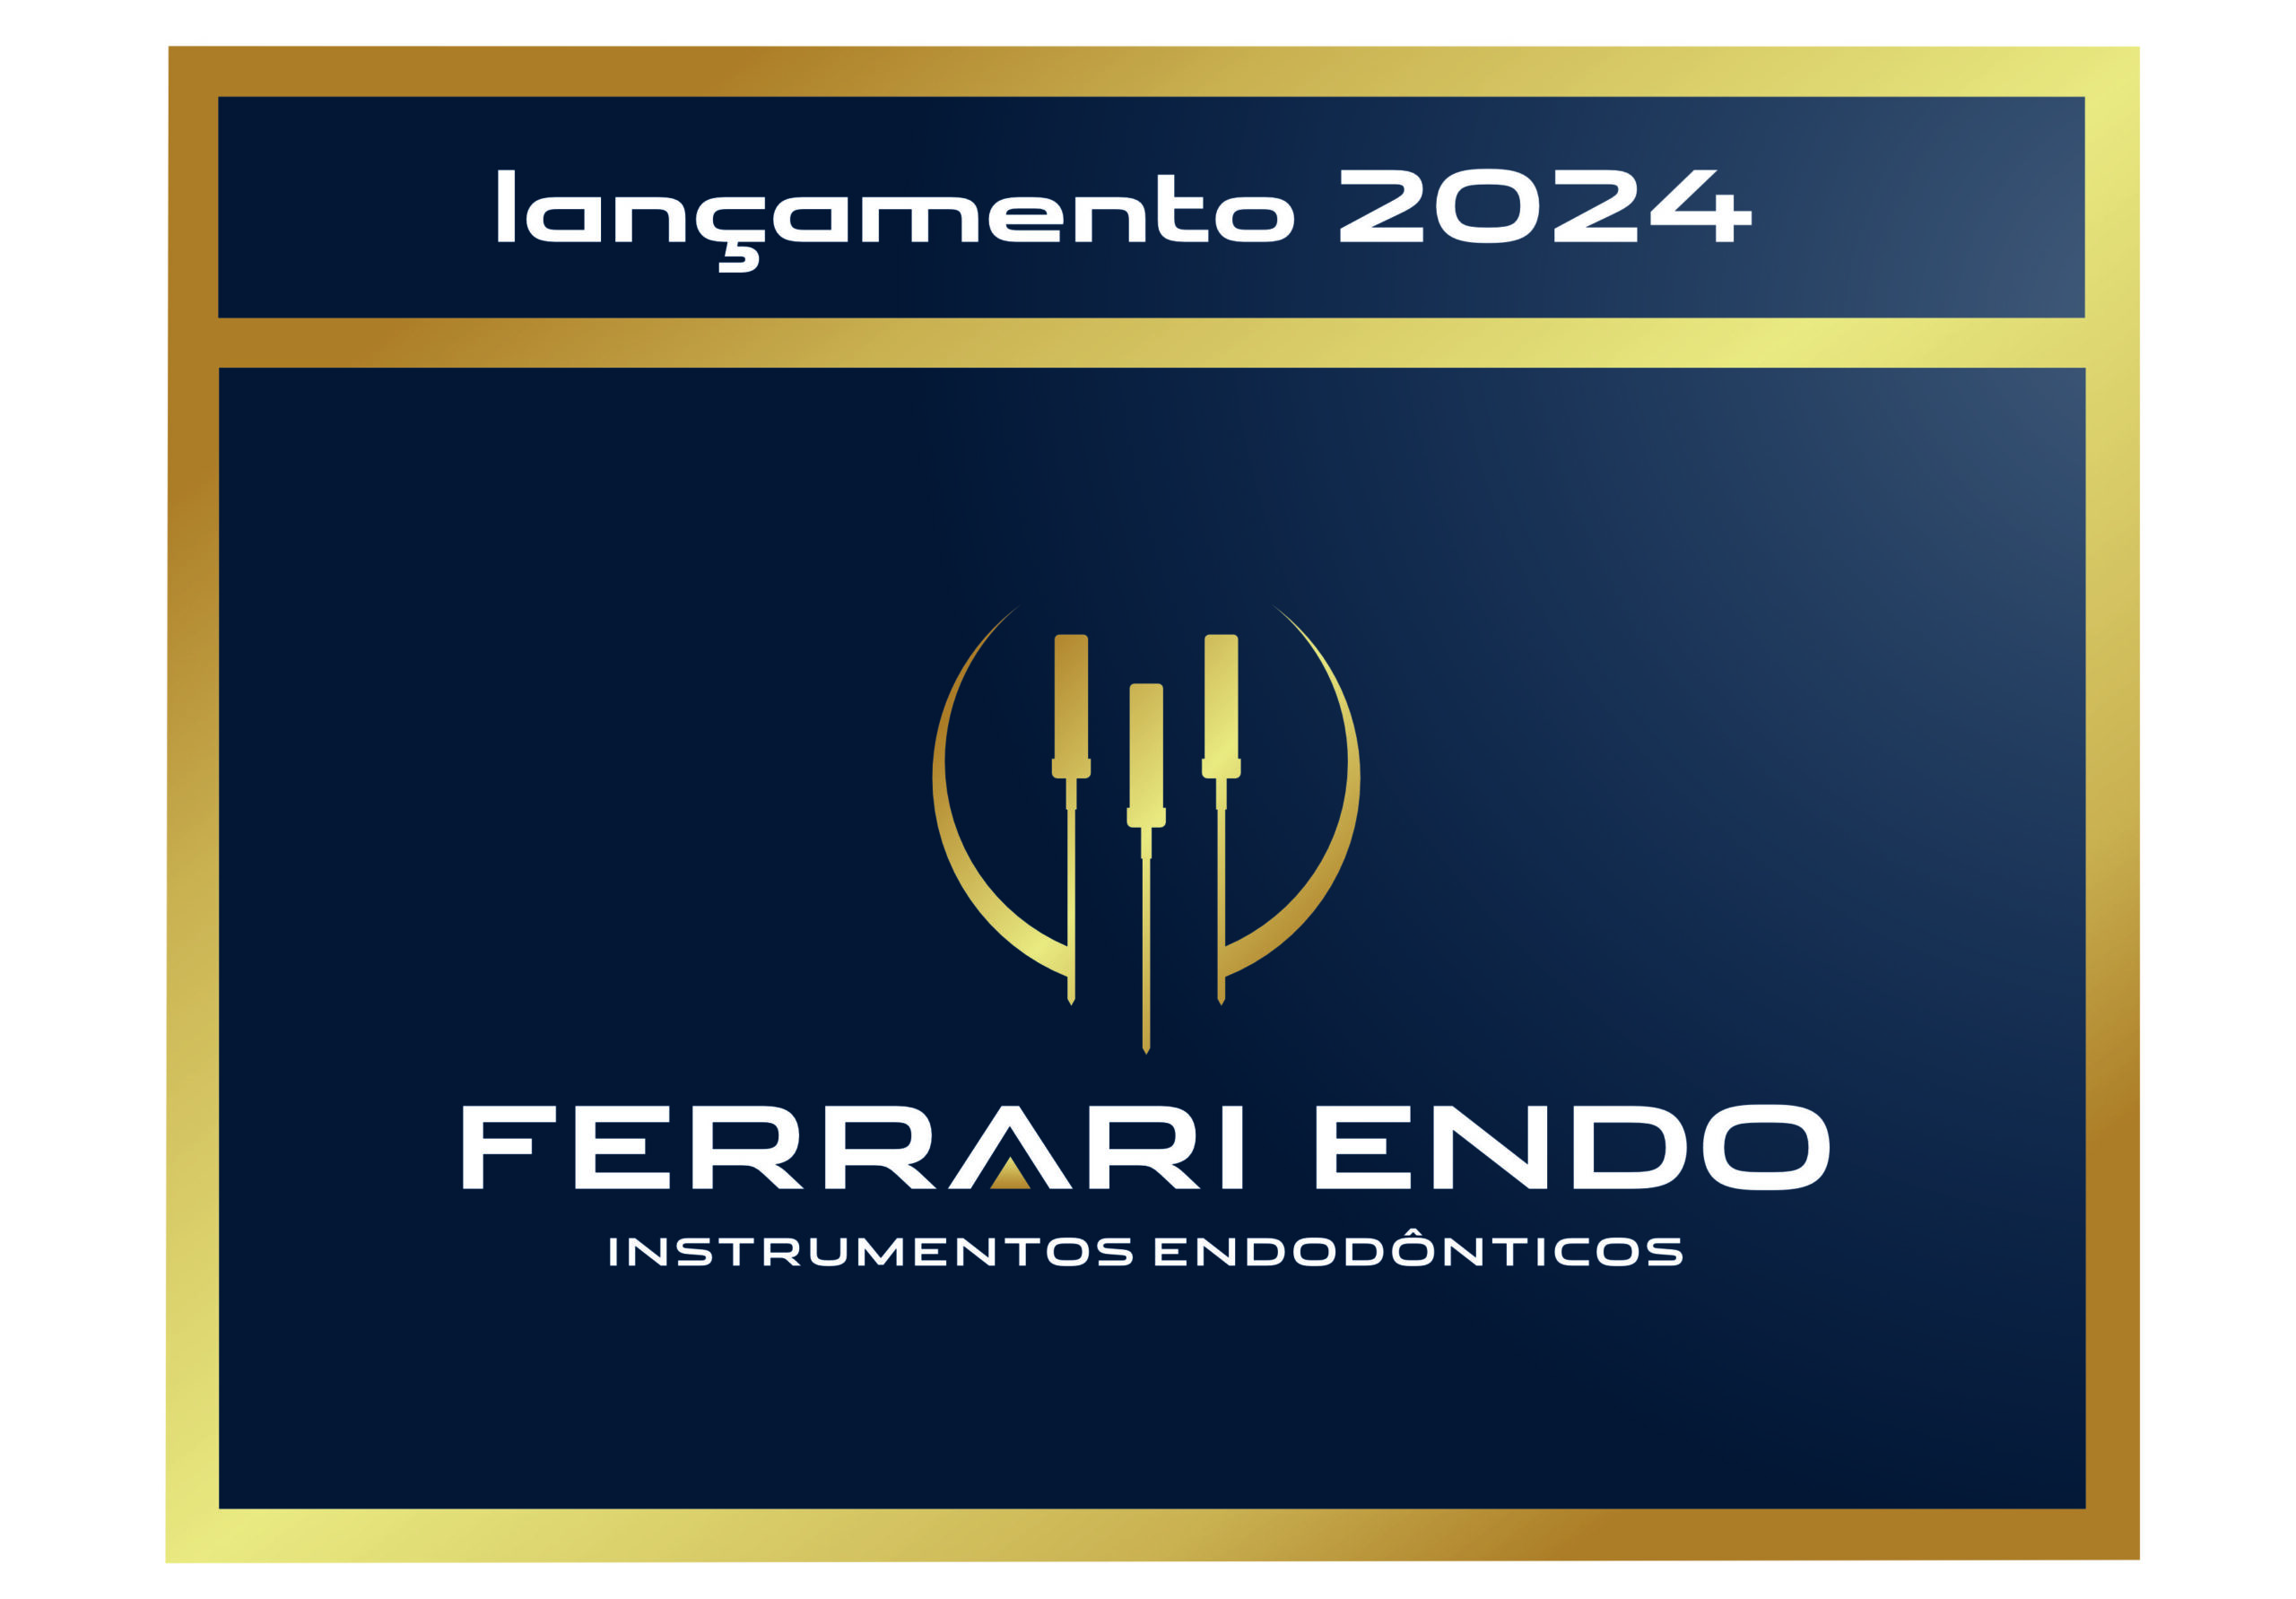 You are currently viewing Ferrari Endo. Endodontic instruments.